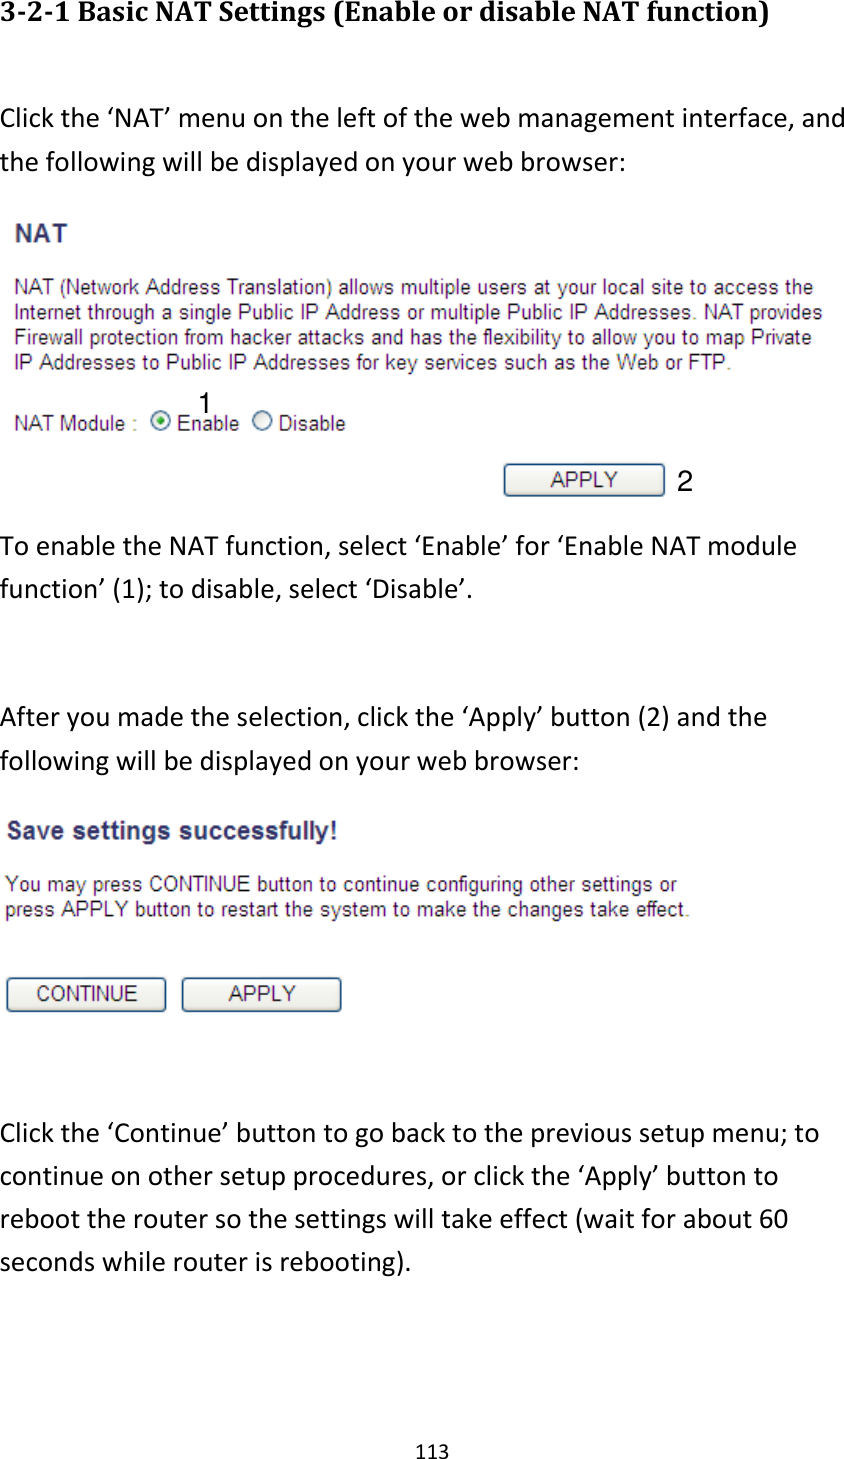 113 3-2-1 Basic NAT Settings (Enable or disable NAT function)  Click the ‘NAT’ menu on the left of the web management interface, and the following will be displayed on your web browser:  To enable the NAT function, select ‘Enable’ for ‘Enable NAT module function’ (1); to disable, select ‘Disable’.  After you made the selection, click the ‘Apply’ button (2) and the following will be displayed on your web browser:   Click the ‘Continue’ button to go back to the previous setup menu; to continue on other setup procedures, or click the ‘Apply’ button to reboot the router so the settings will take effect (wait for about 60 seconds while router is rebooting).   1 2 